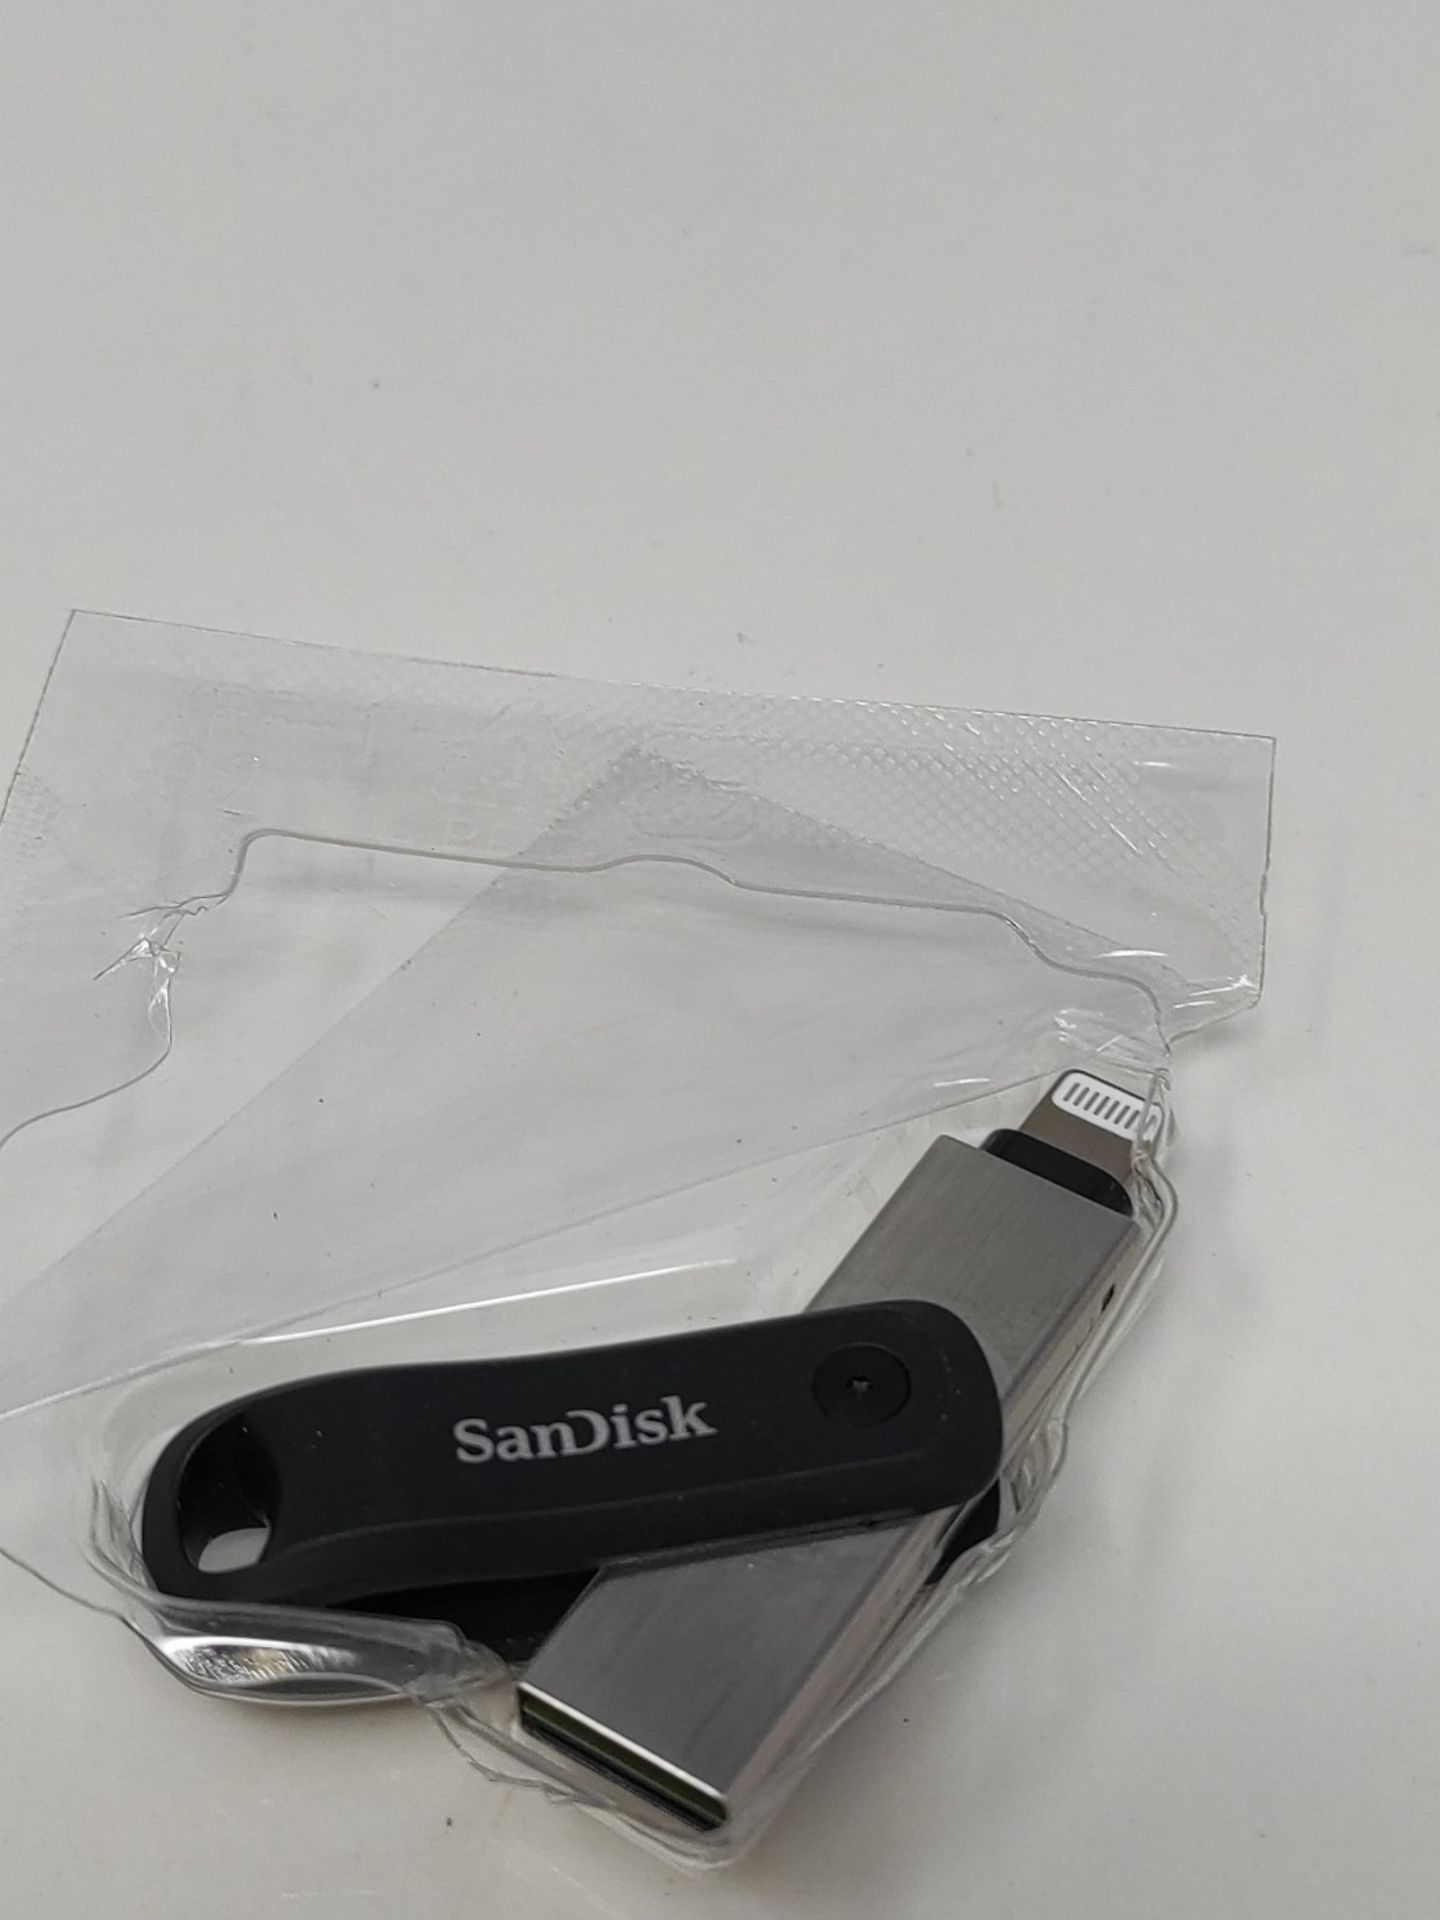 SanDisk iXpand Go 128GB - Dual connector USB drive for backing up iPhone and iPad - Image 4 of 4